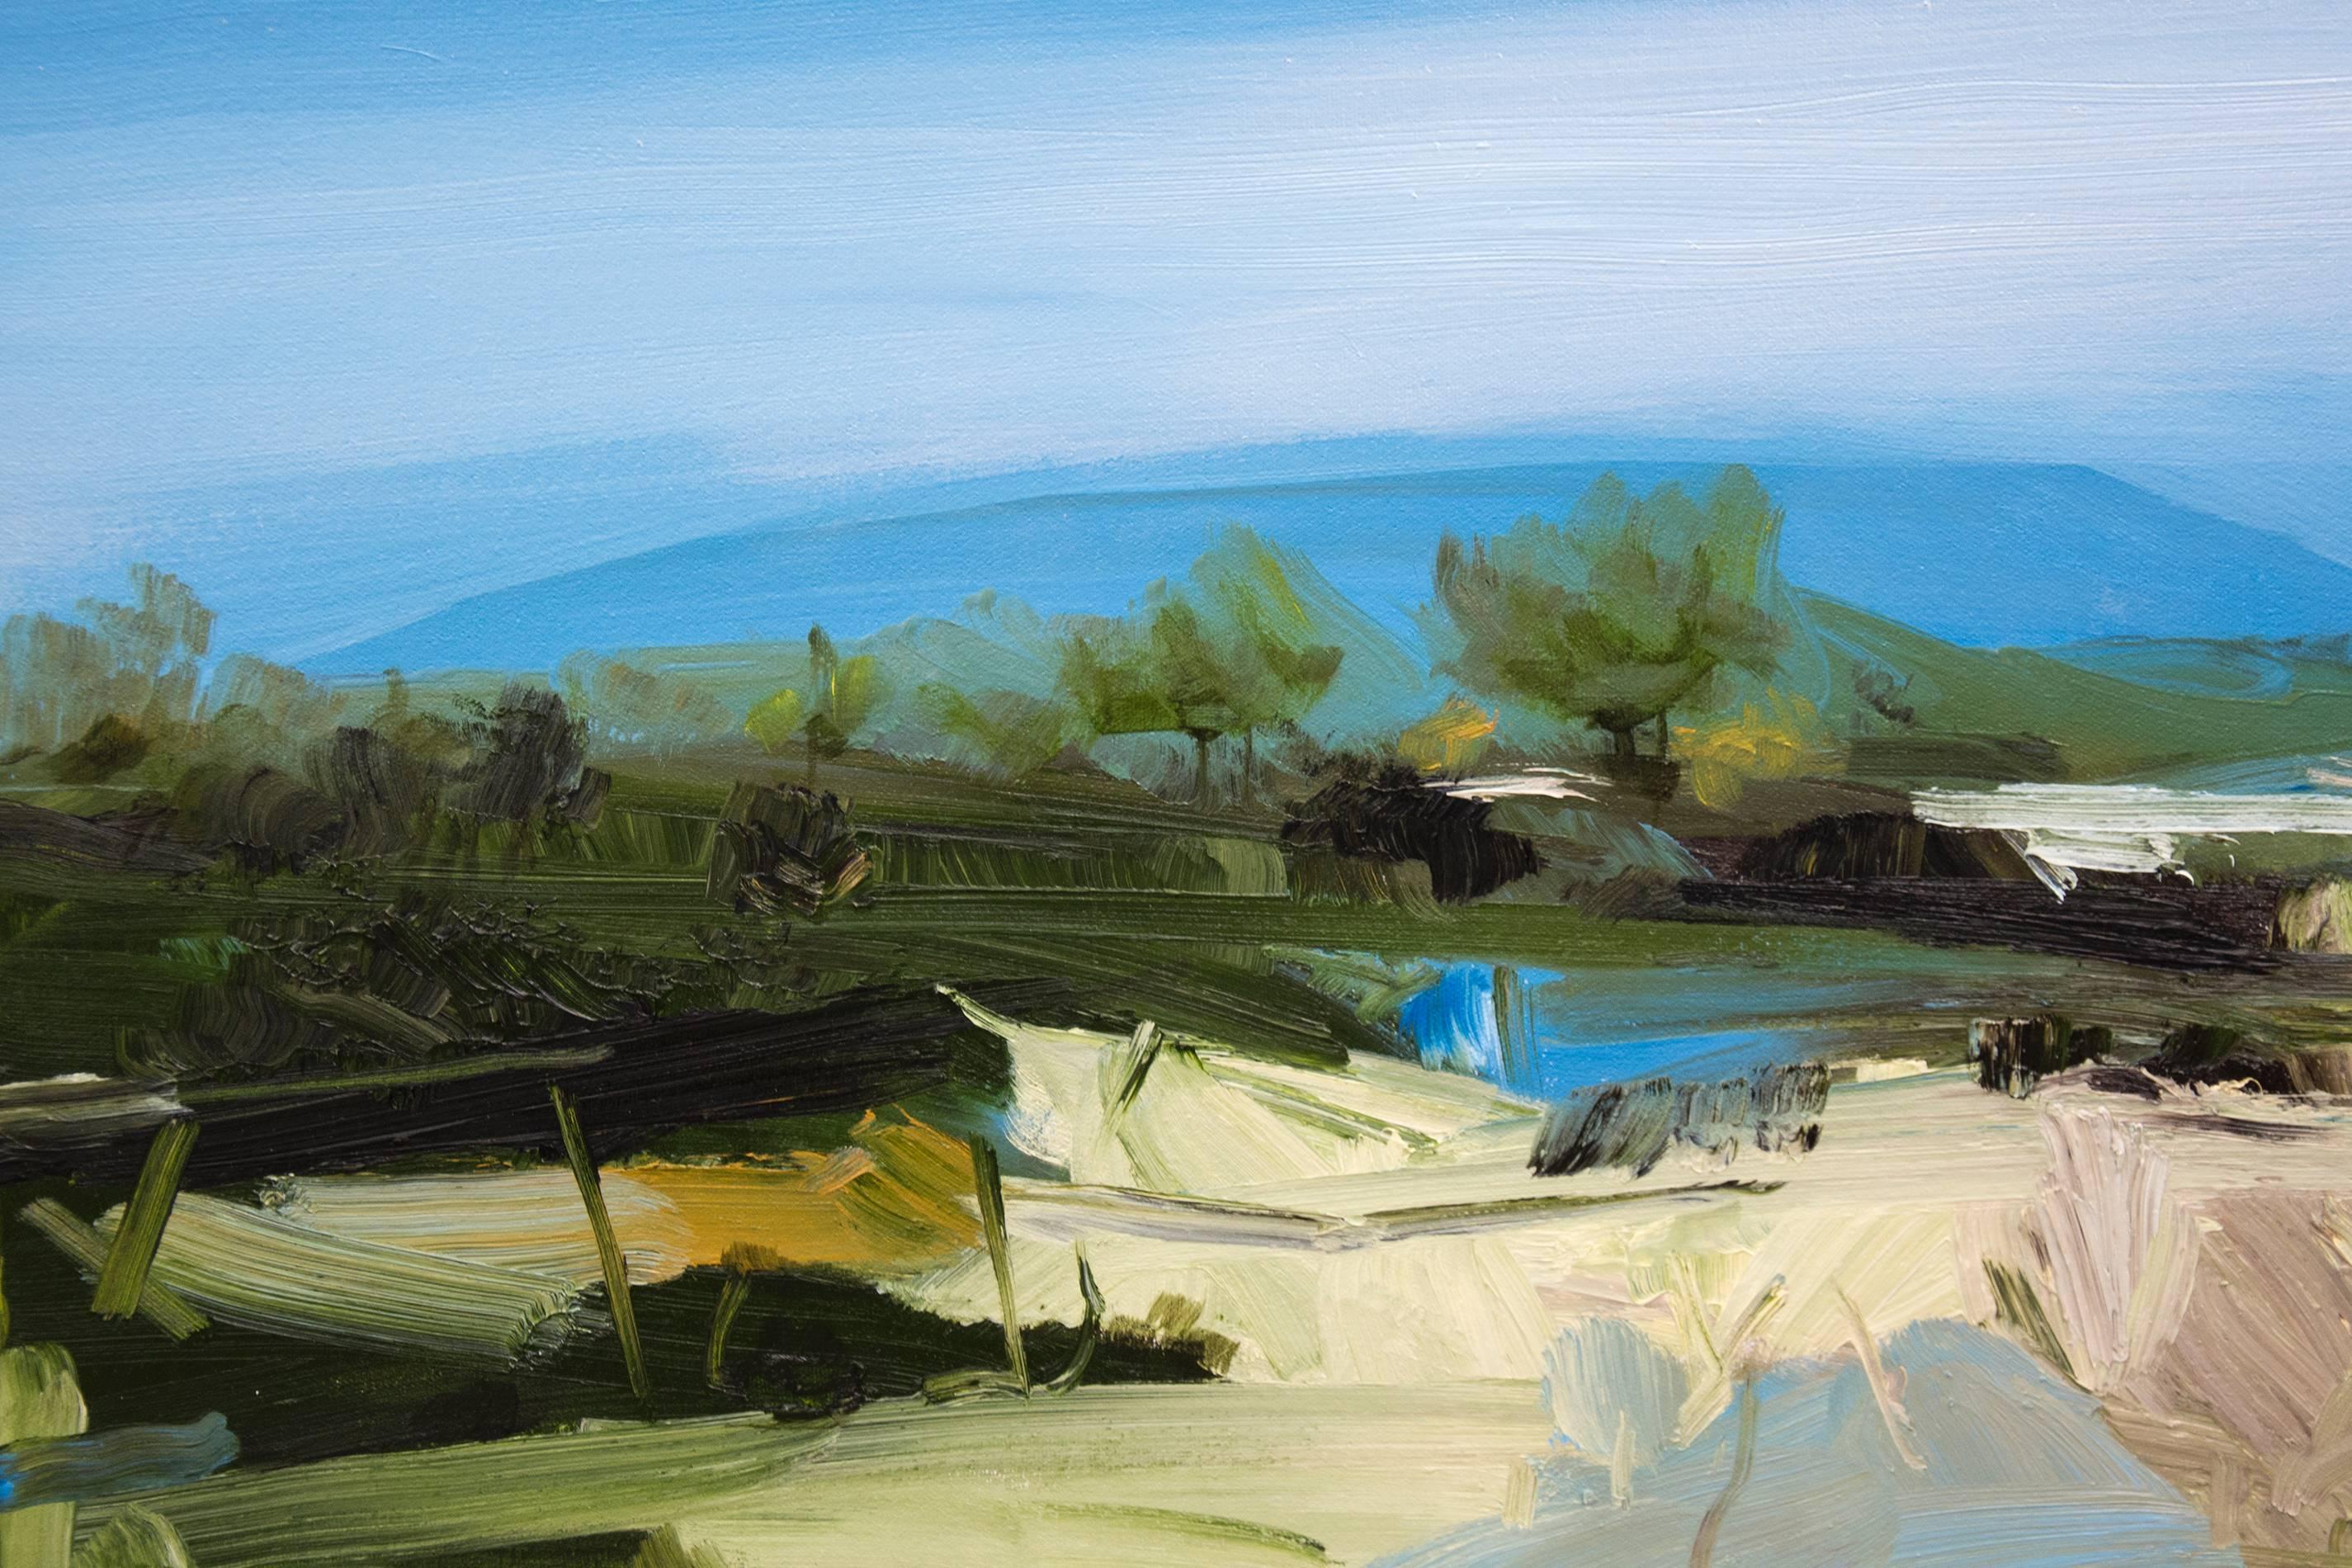 Arrival of Spring - Blue Landscape Painting by Simon Andrew